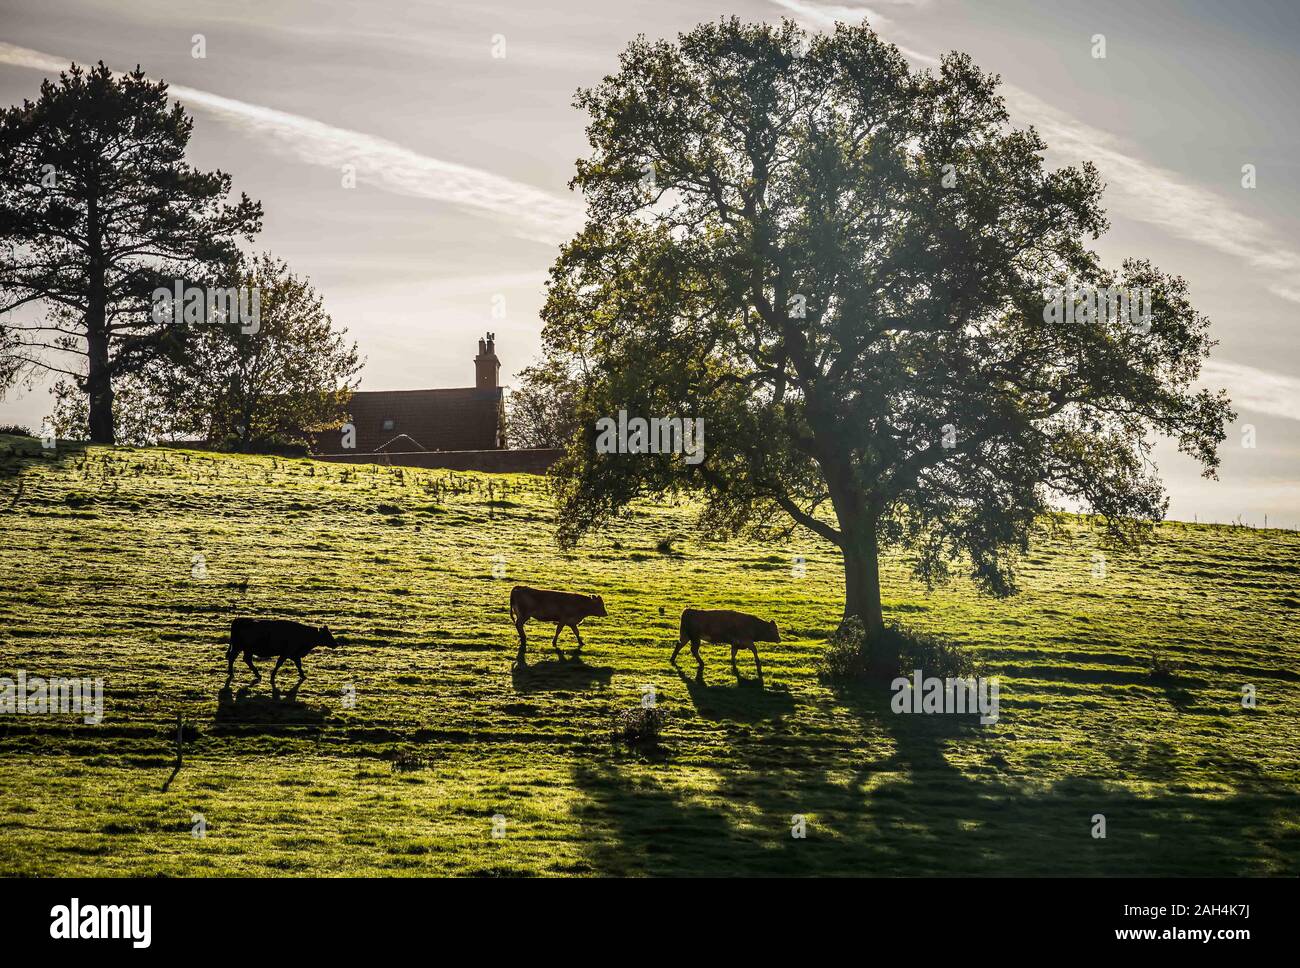 Cows crossing a field in eveing light Stock Photo